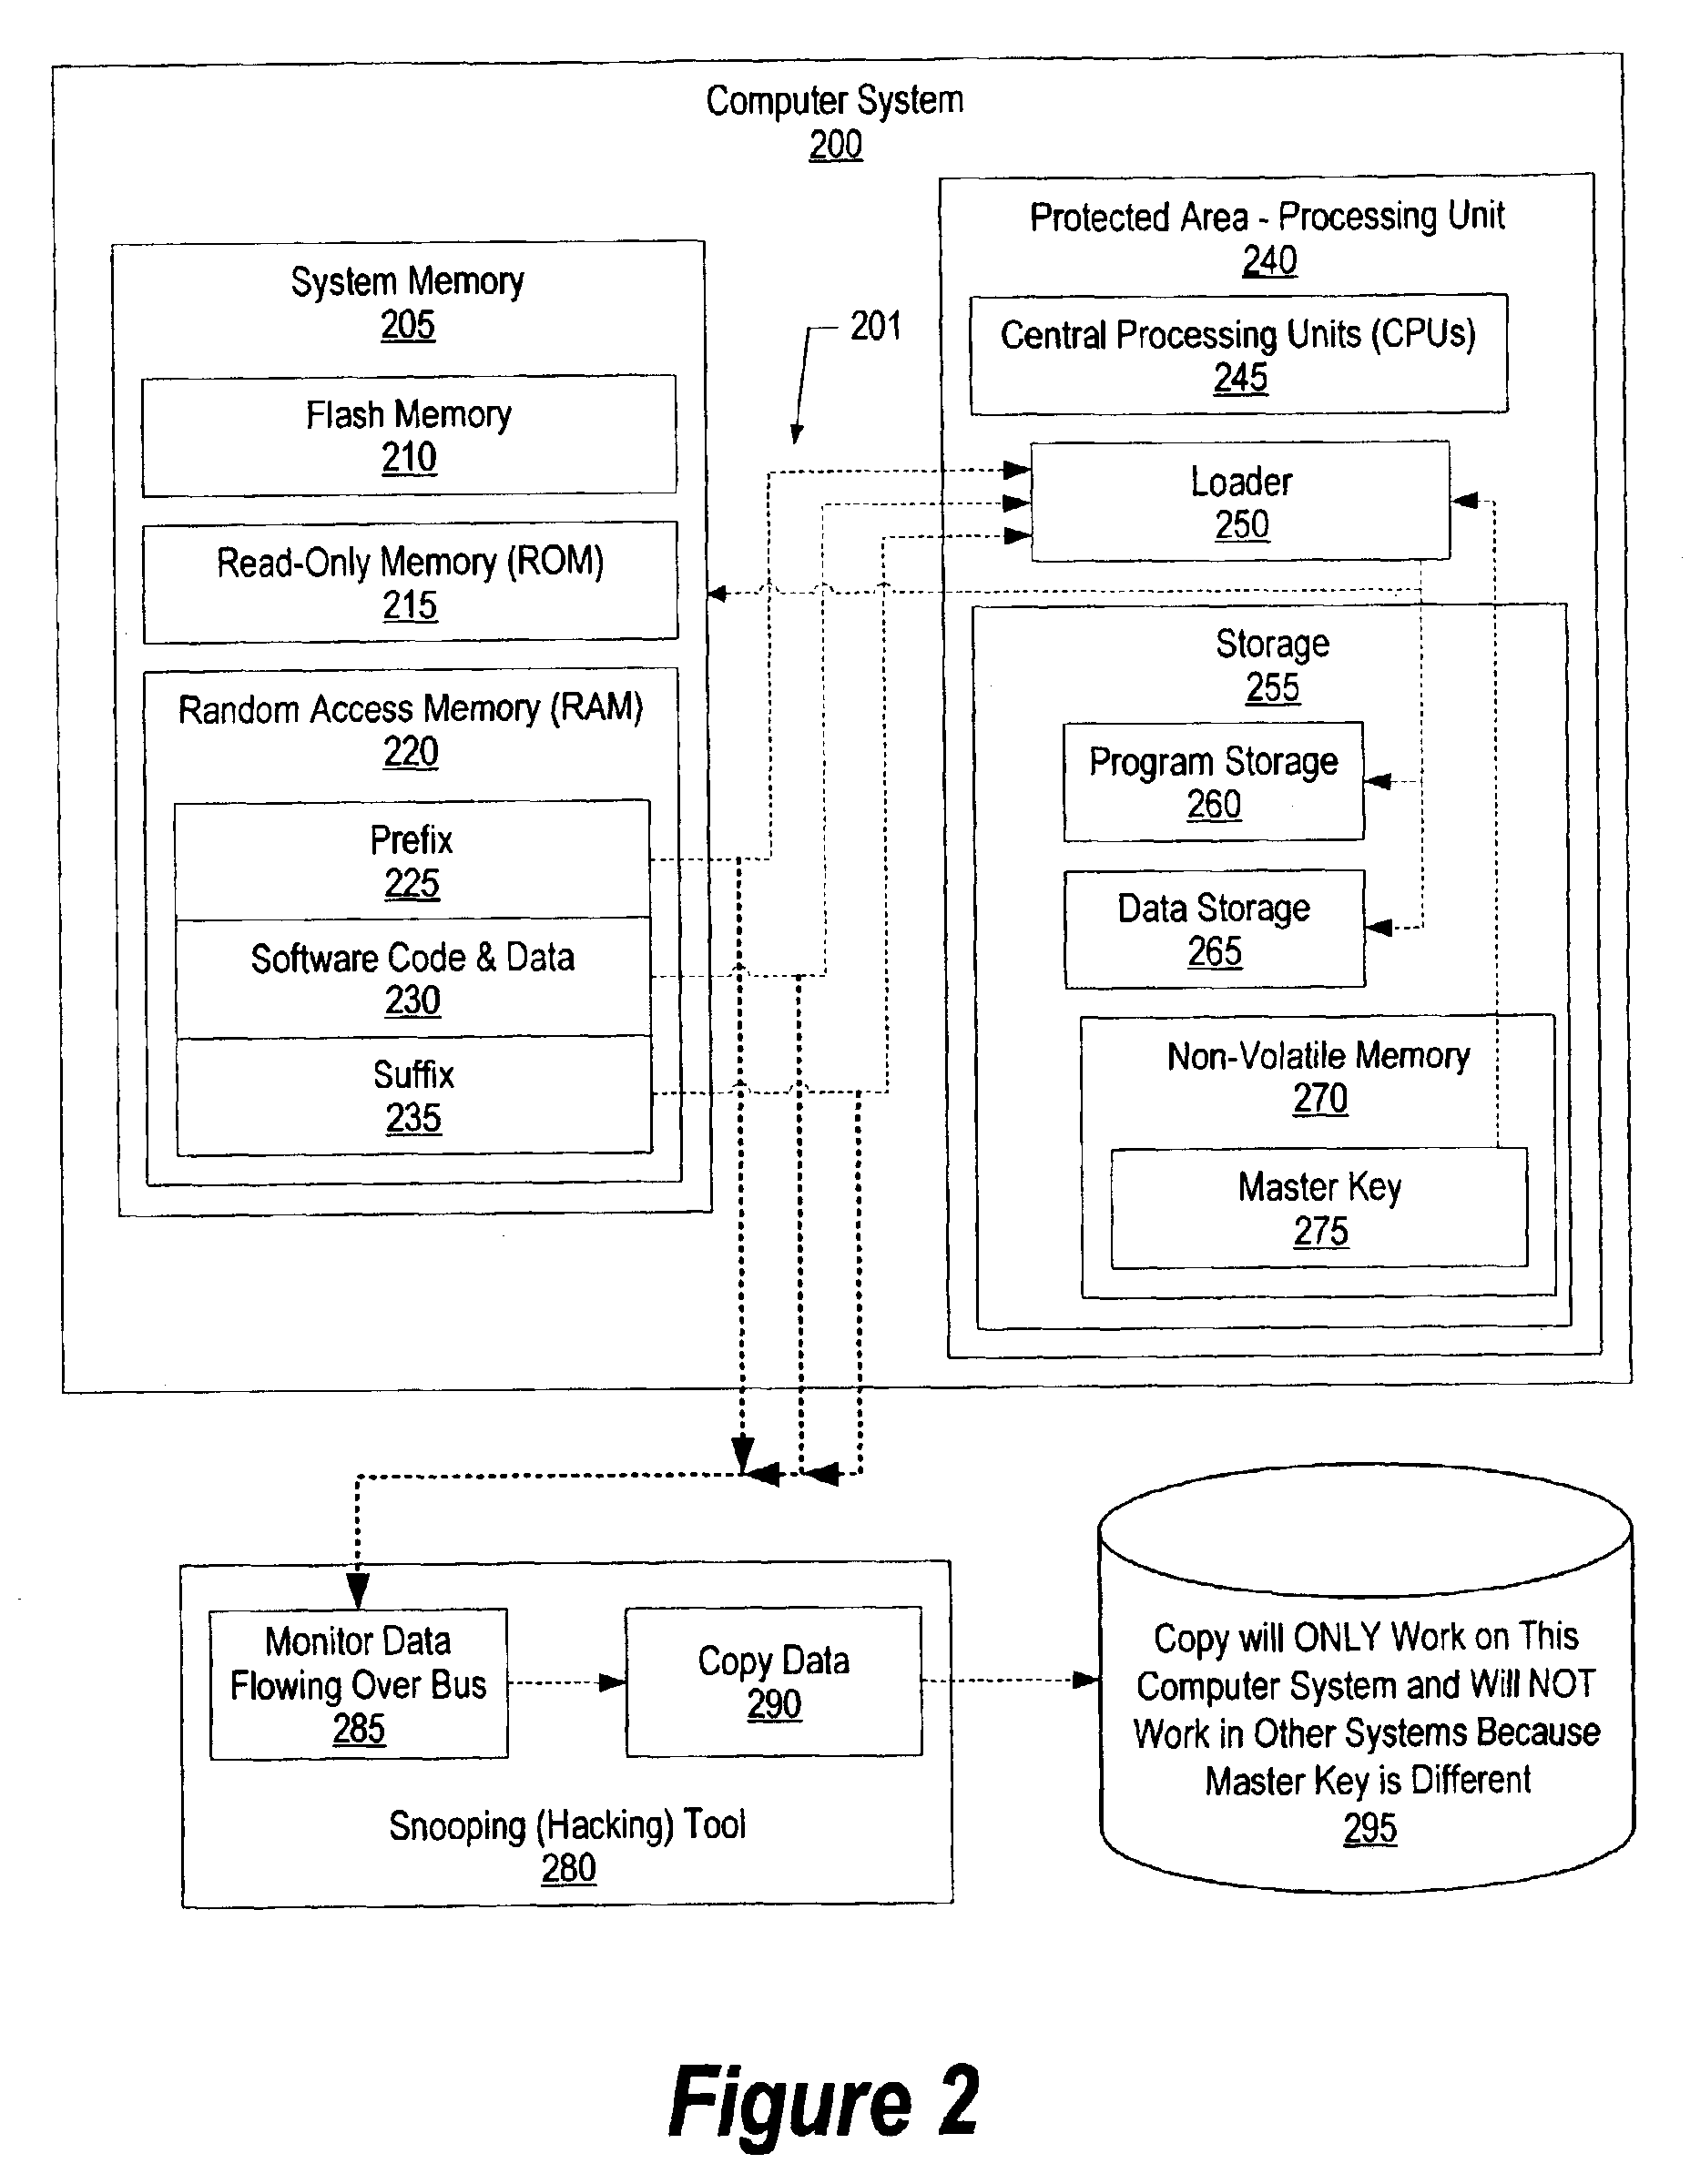 System and method for authenticating software using hidden intermediate keys